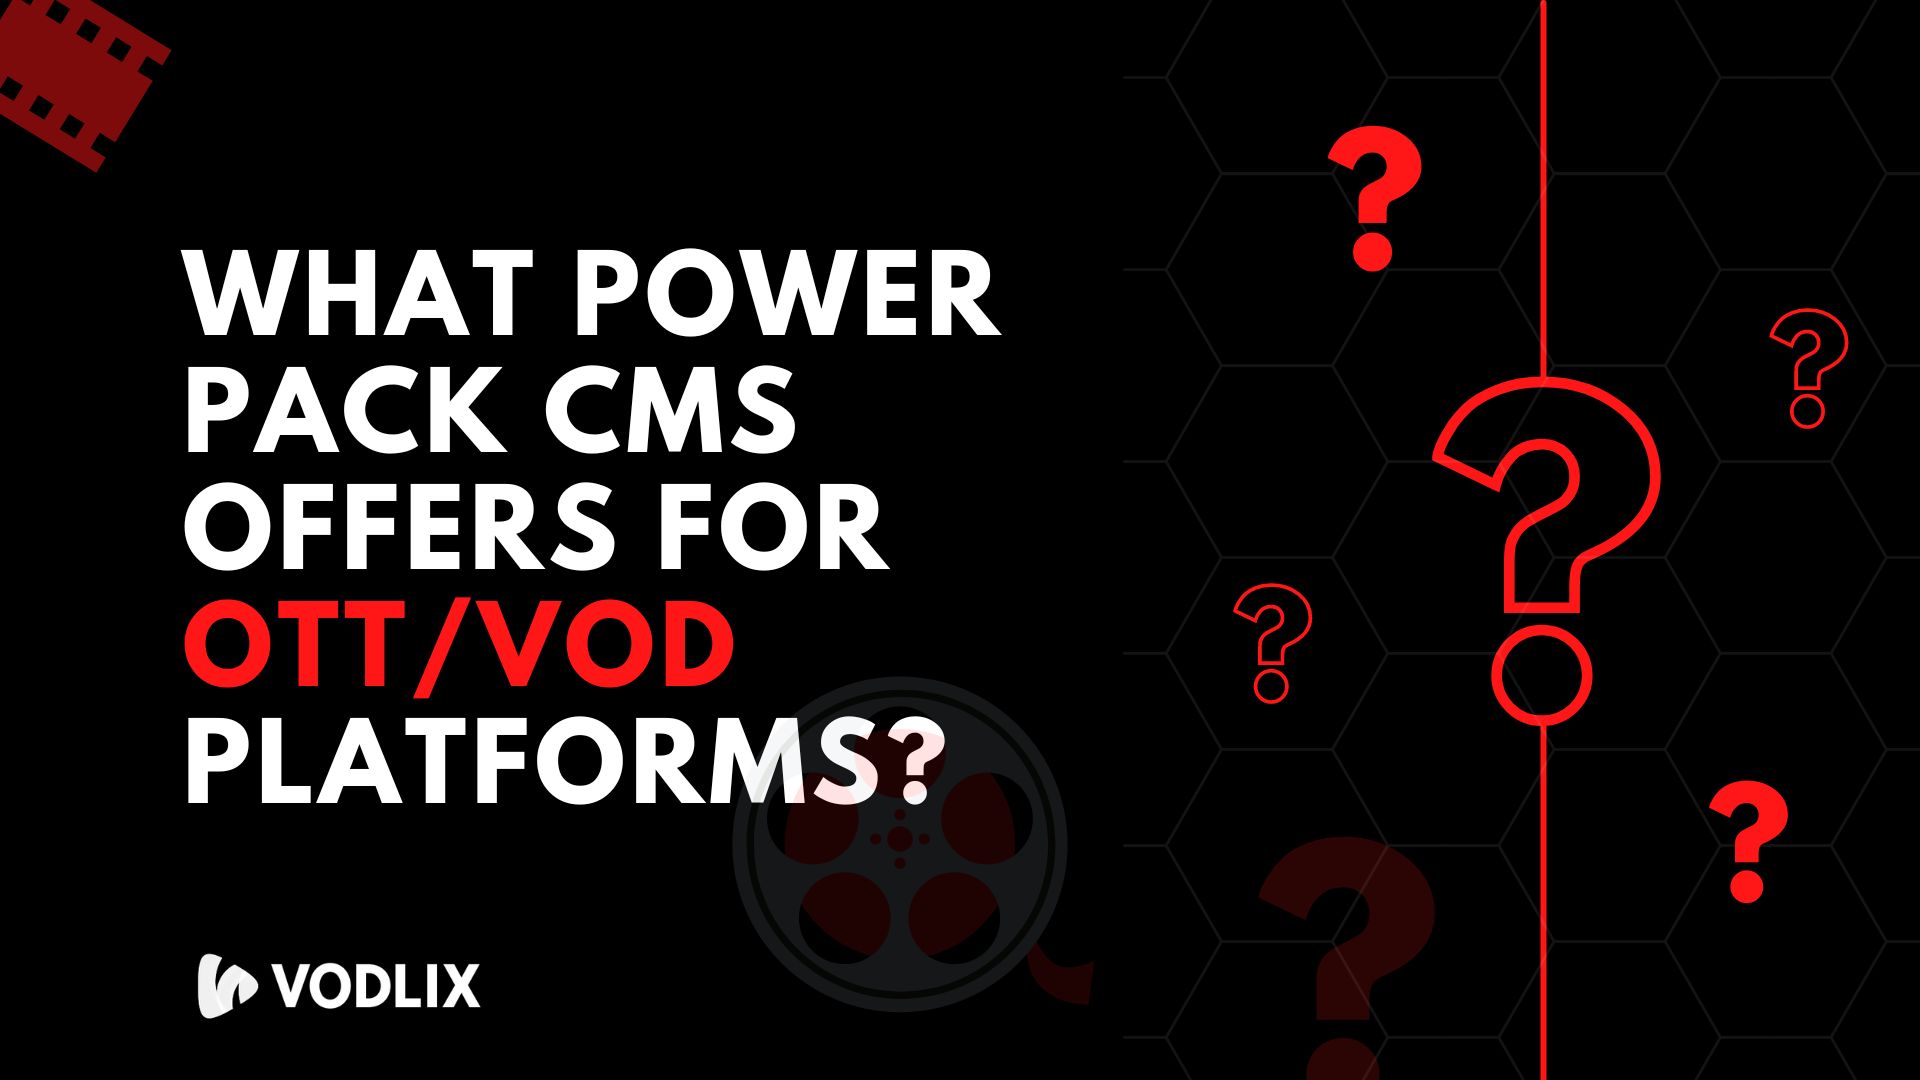 What Power pack CMS offers for OTT/VOD Platforms? Vodlix